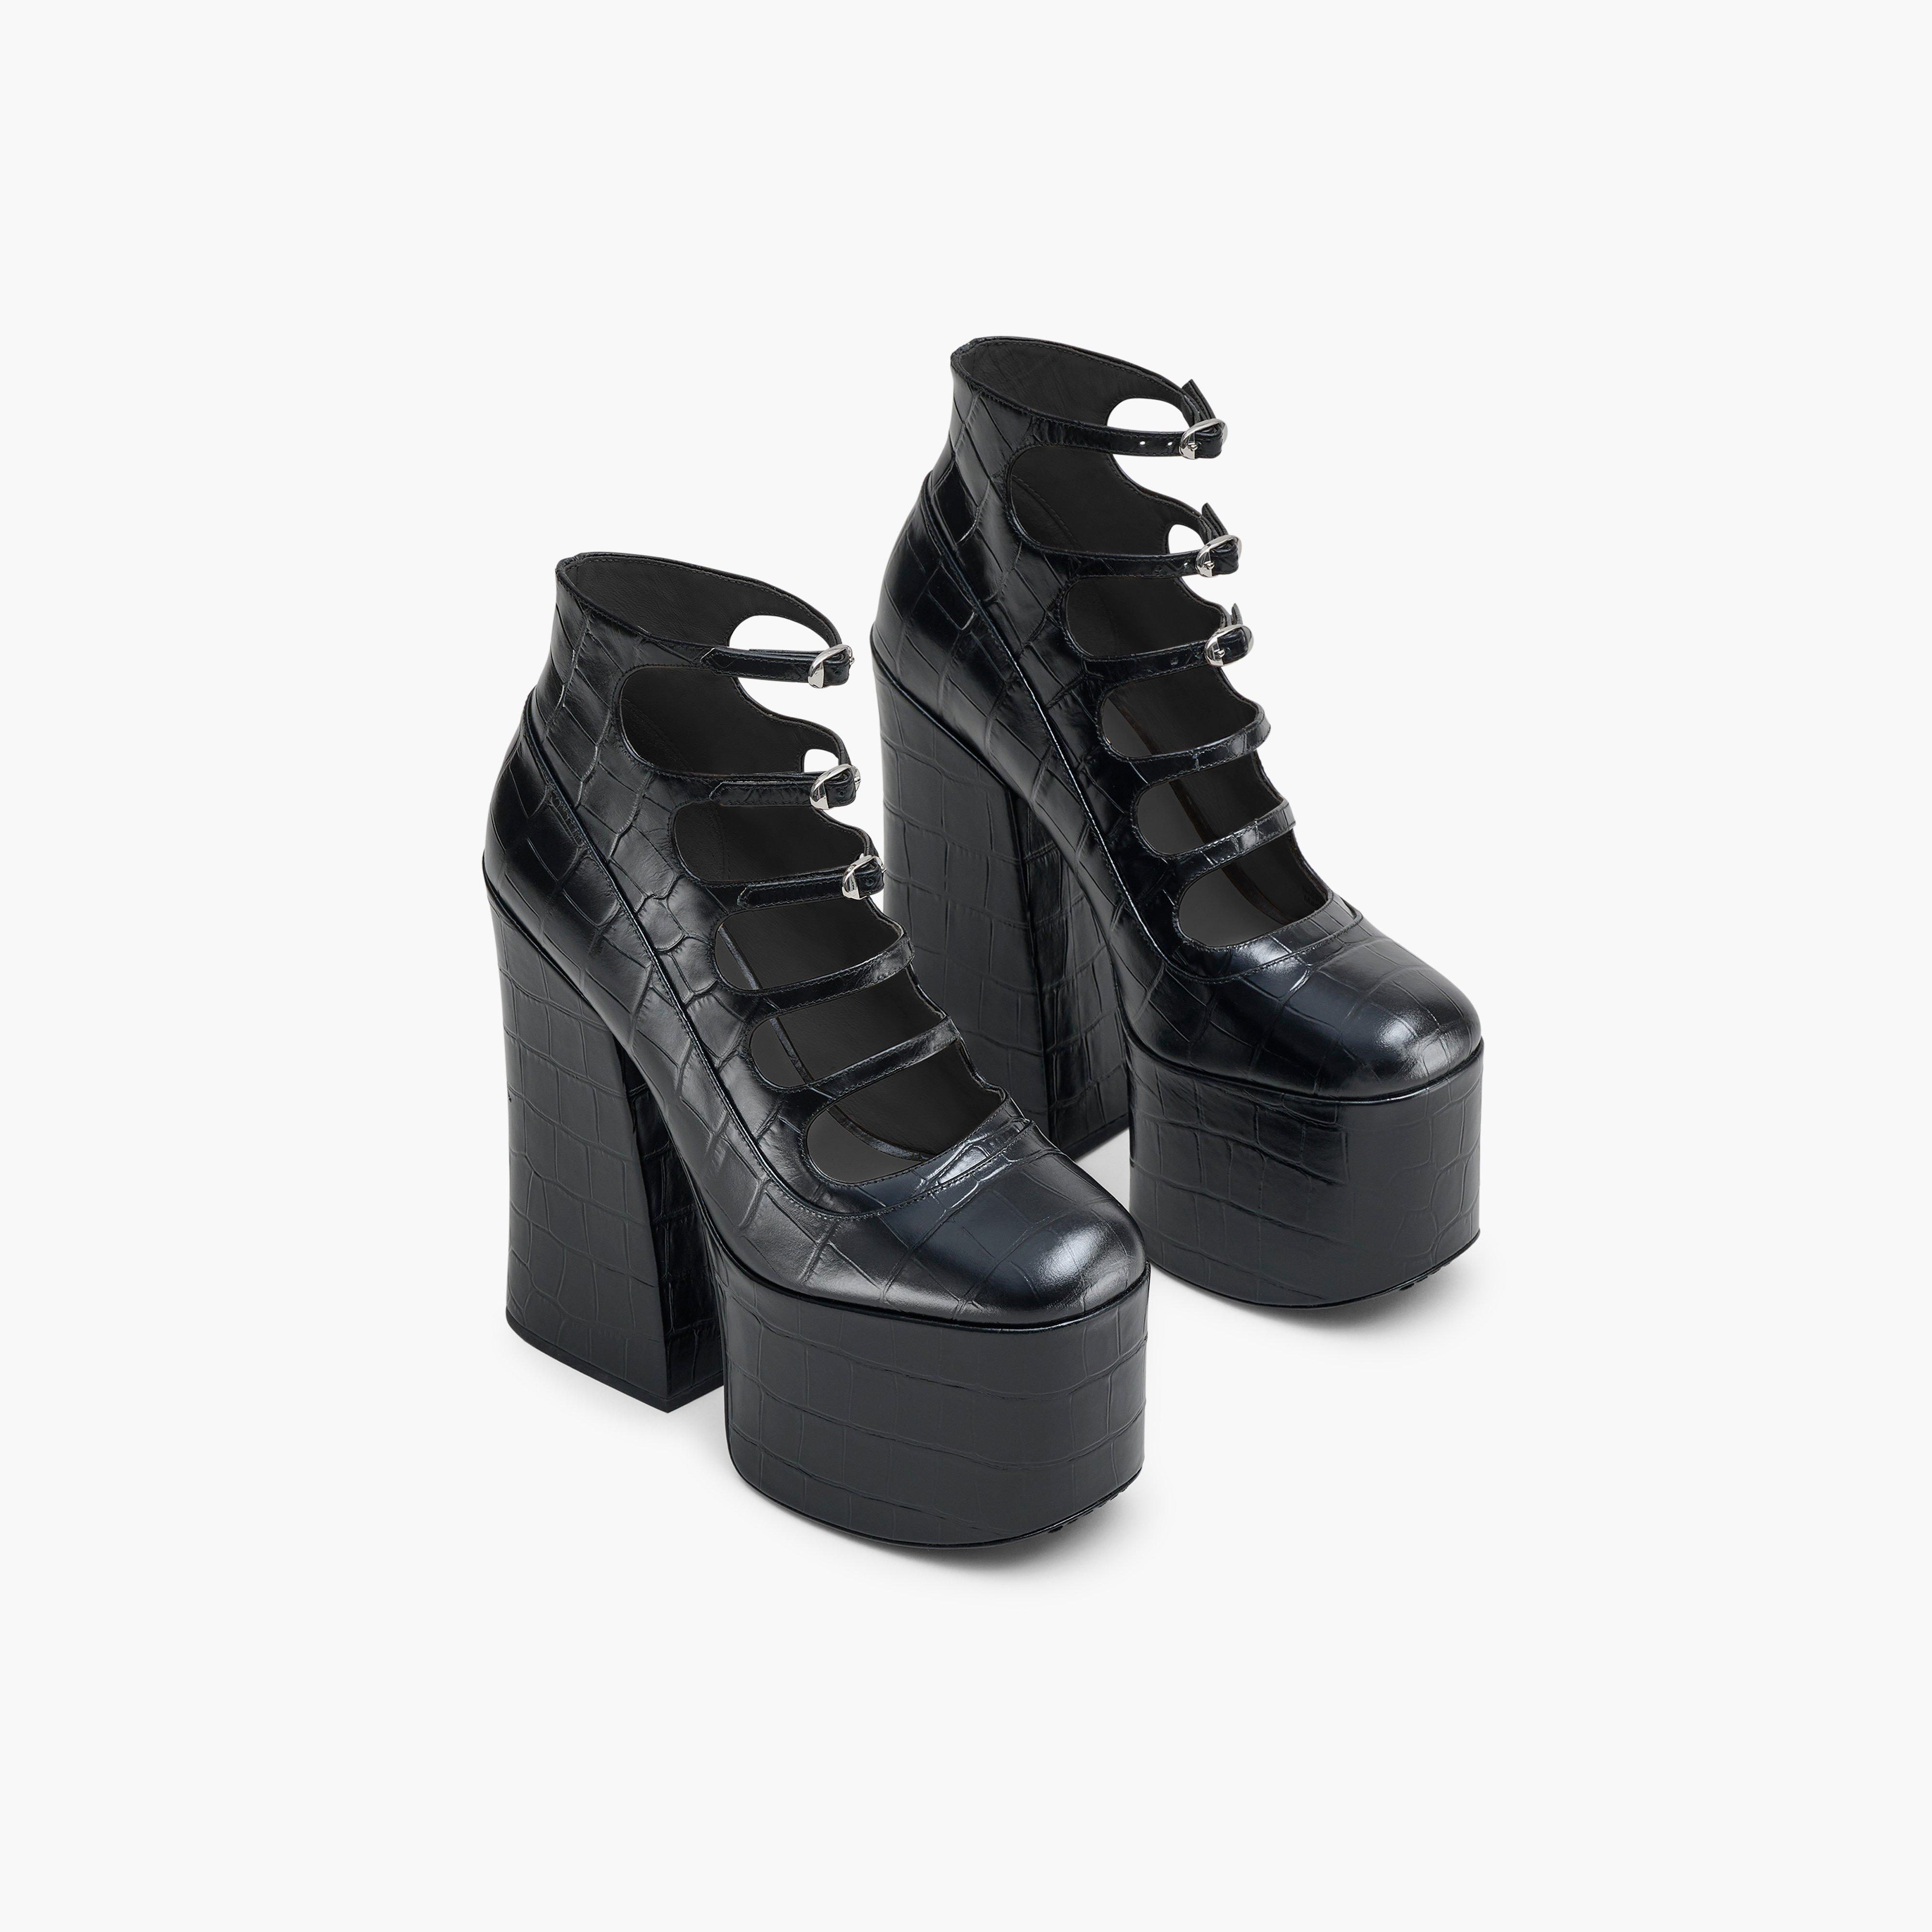 THE KIKI ANKLE BOOT